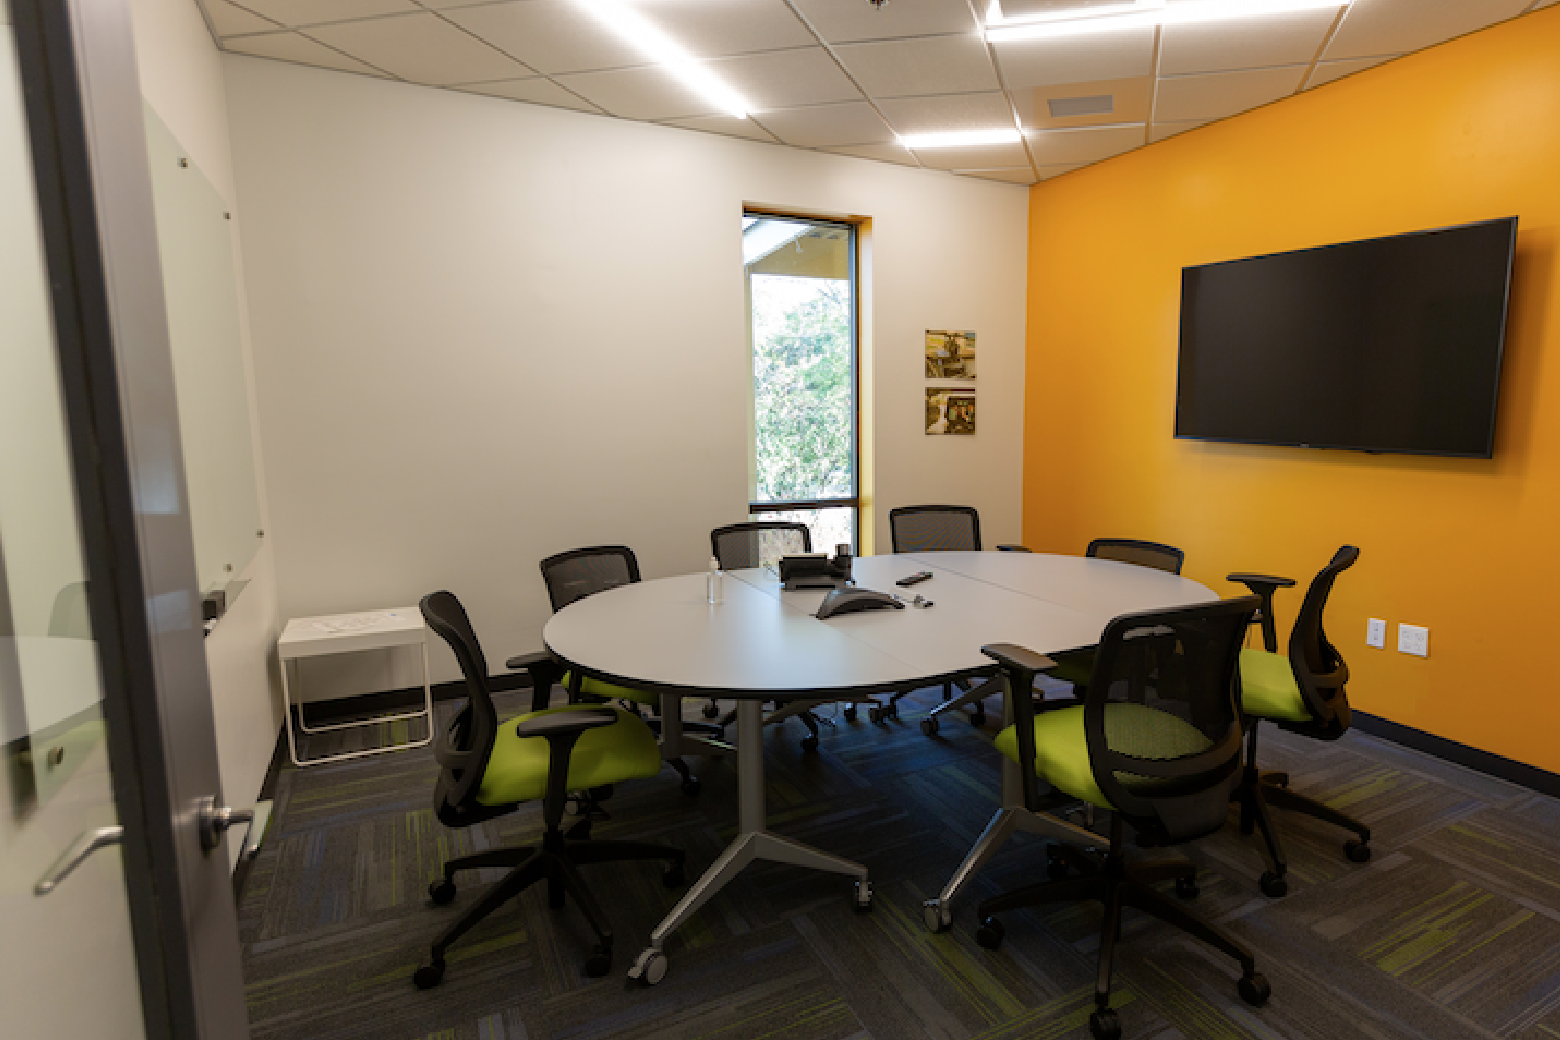 The production offices and conference rooms at (add)ventures EPIC HQ.